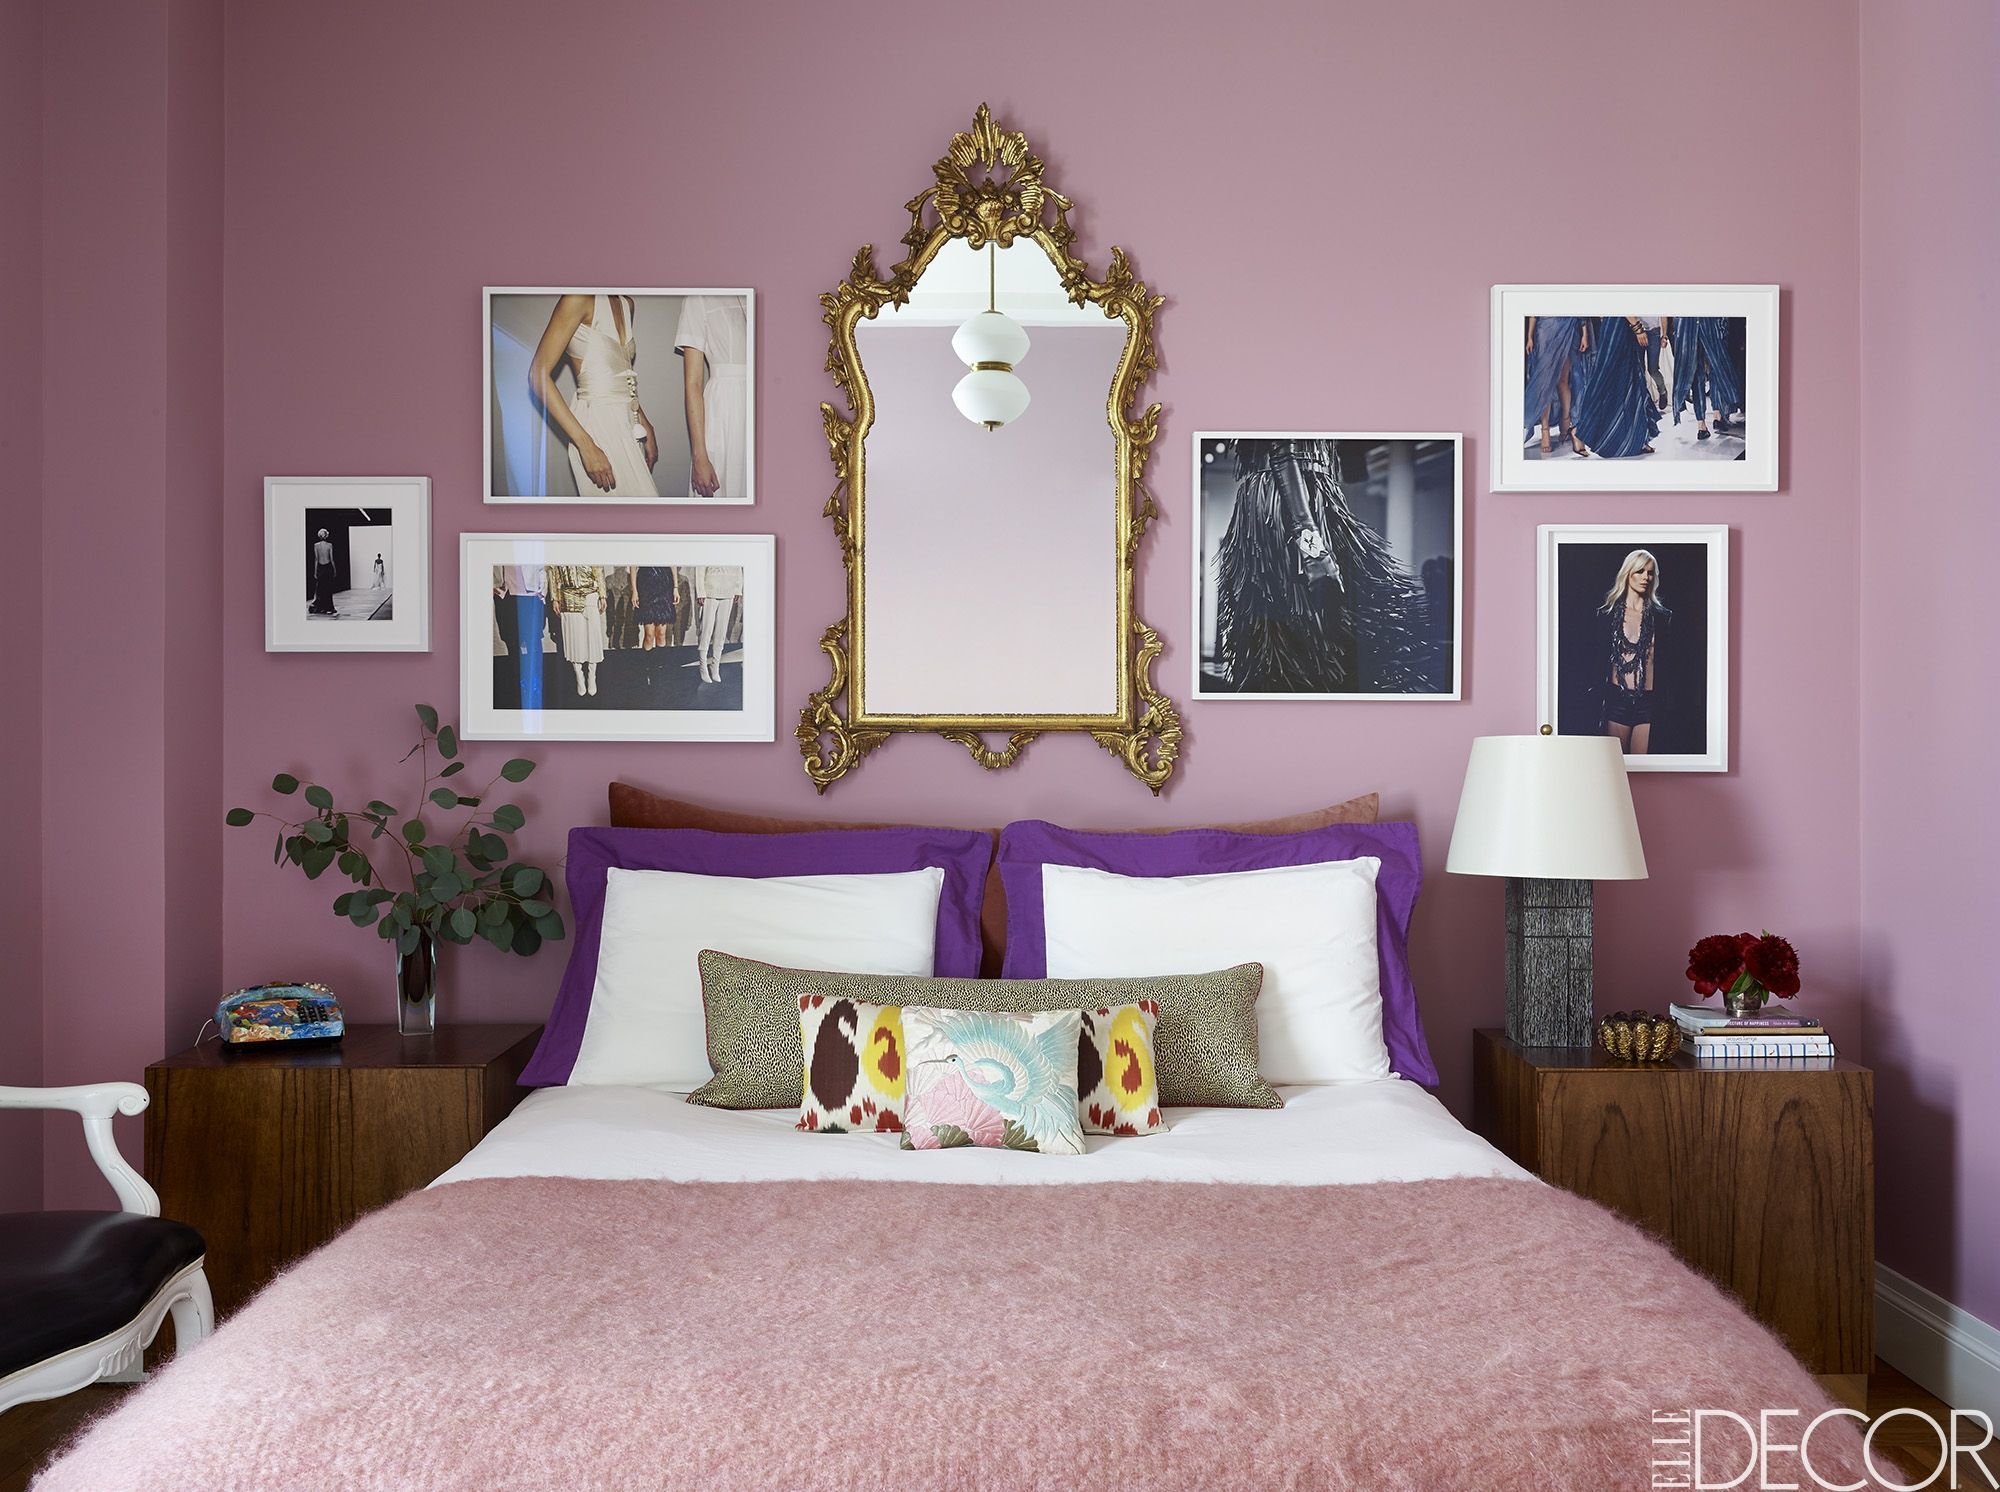 25 Purple Room Decorating Ideas How To Use Purple Walls Decor,What Colors Compliment Grey